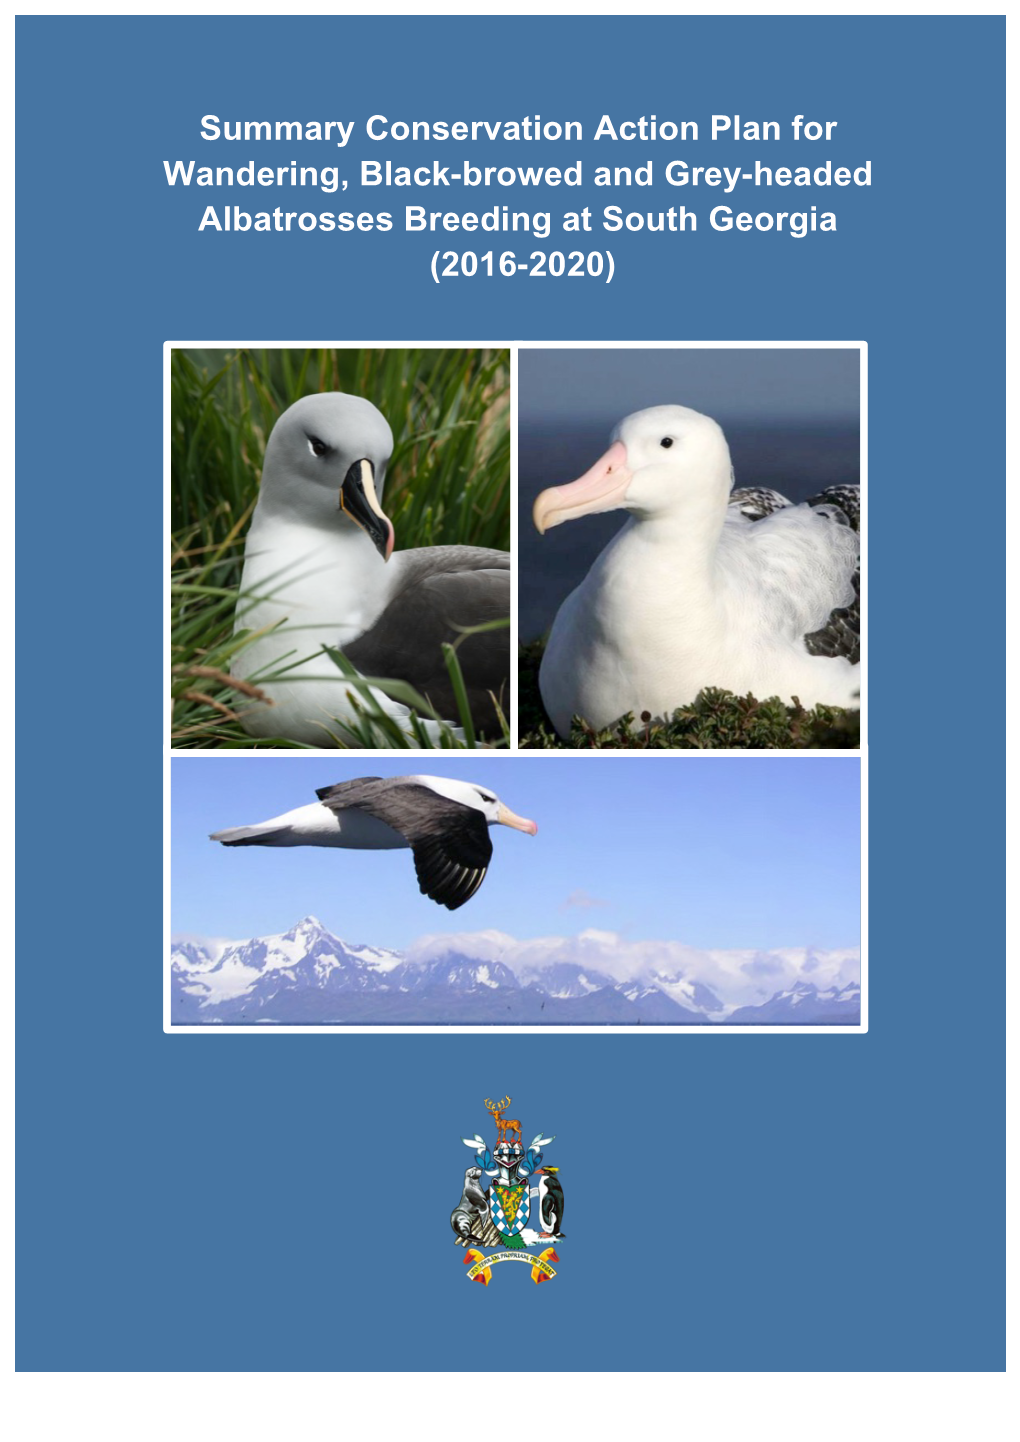 Summary Conservation Action Plan for Wandering, Black-Browed and Grey-Headed Albatrosses Breeding at South Georgia (2016-2020)